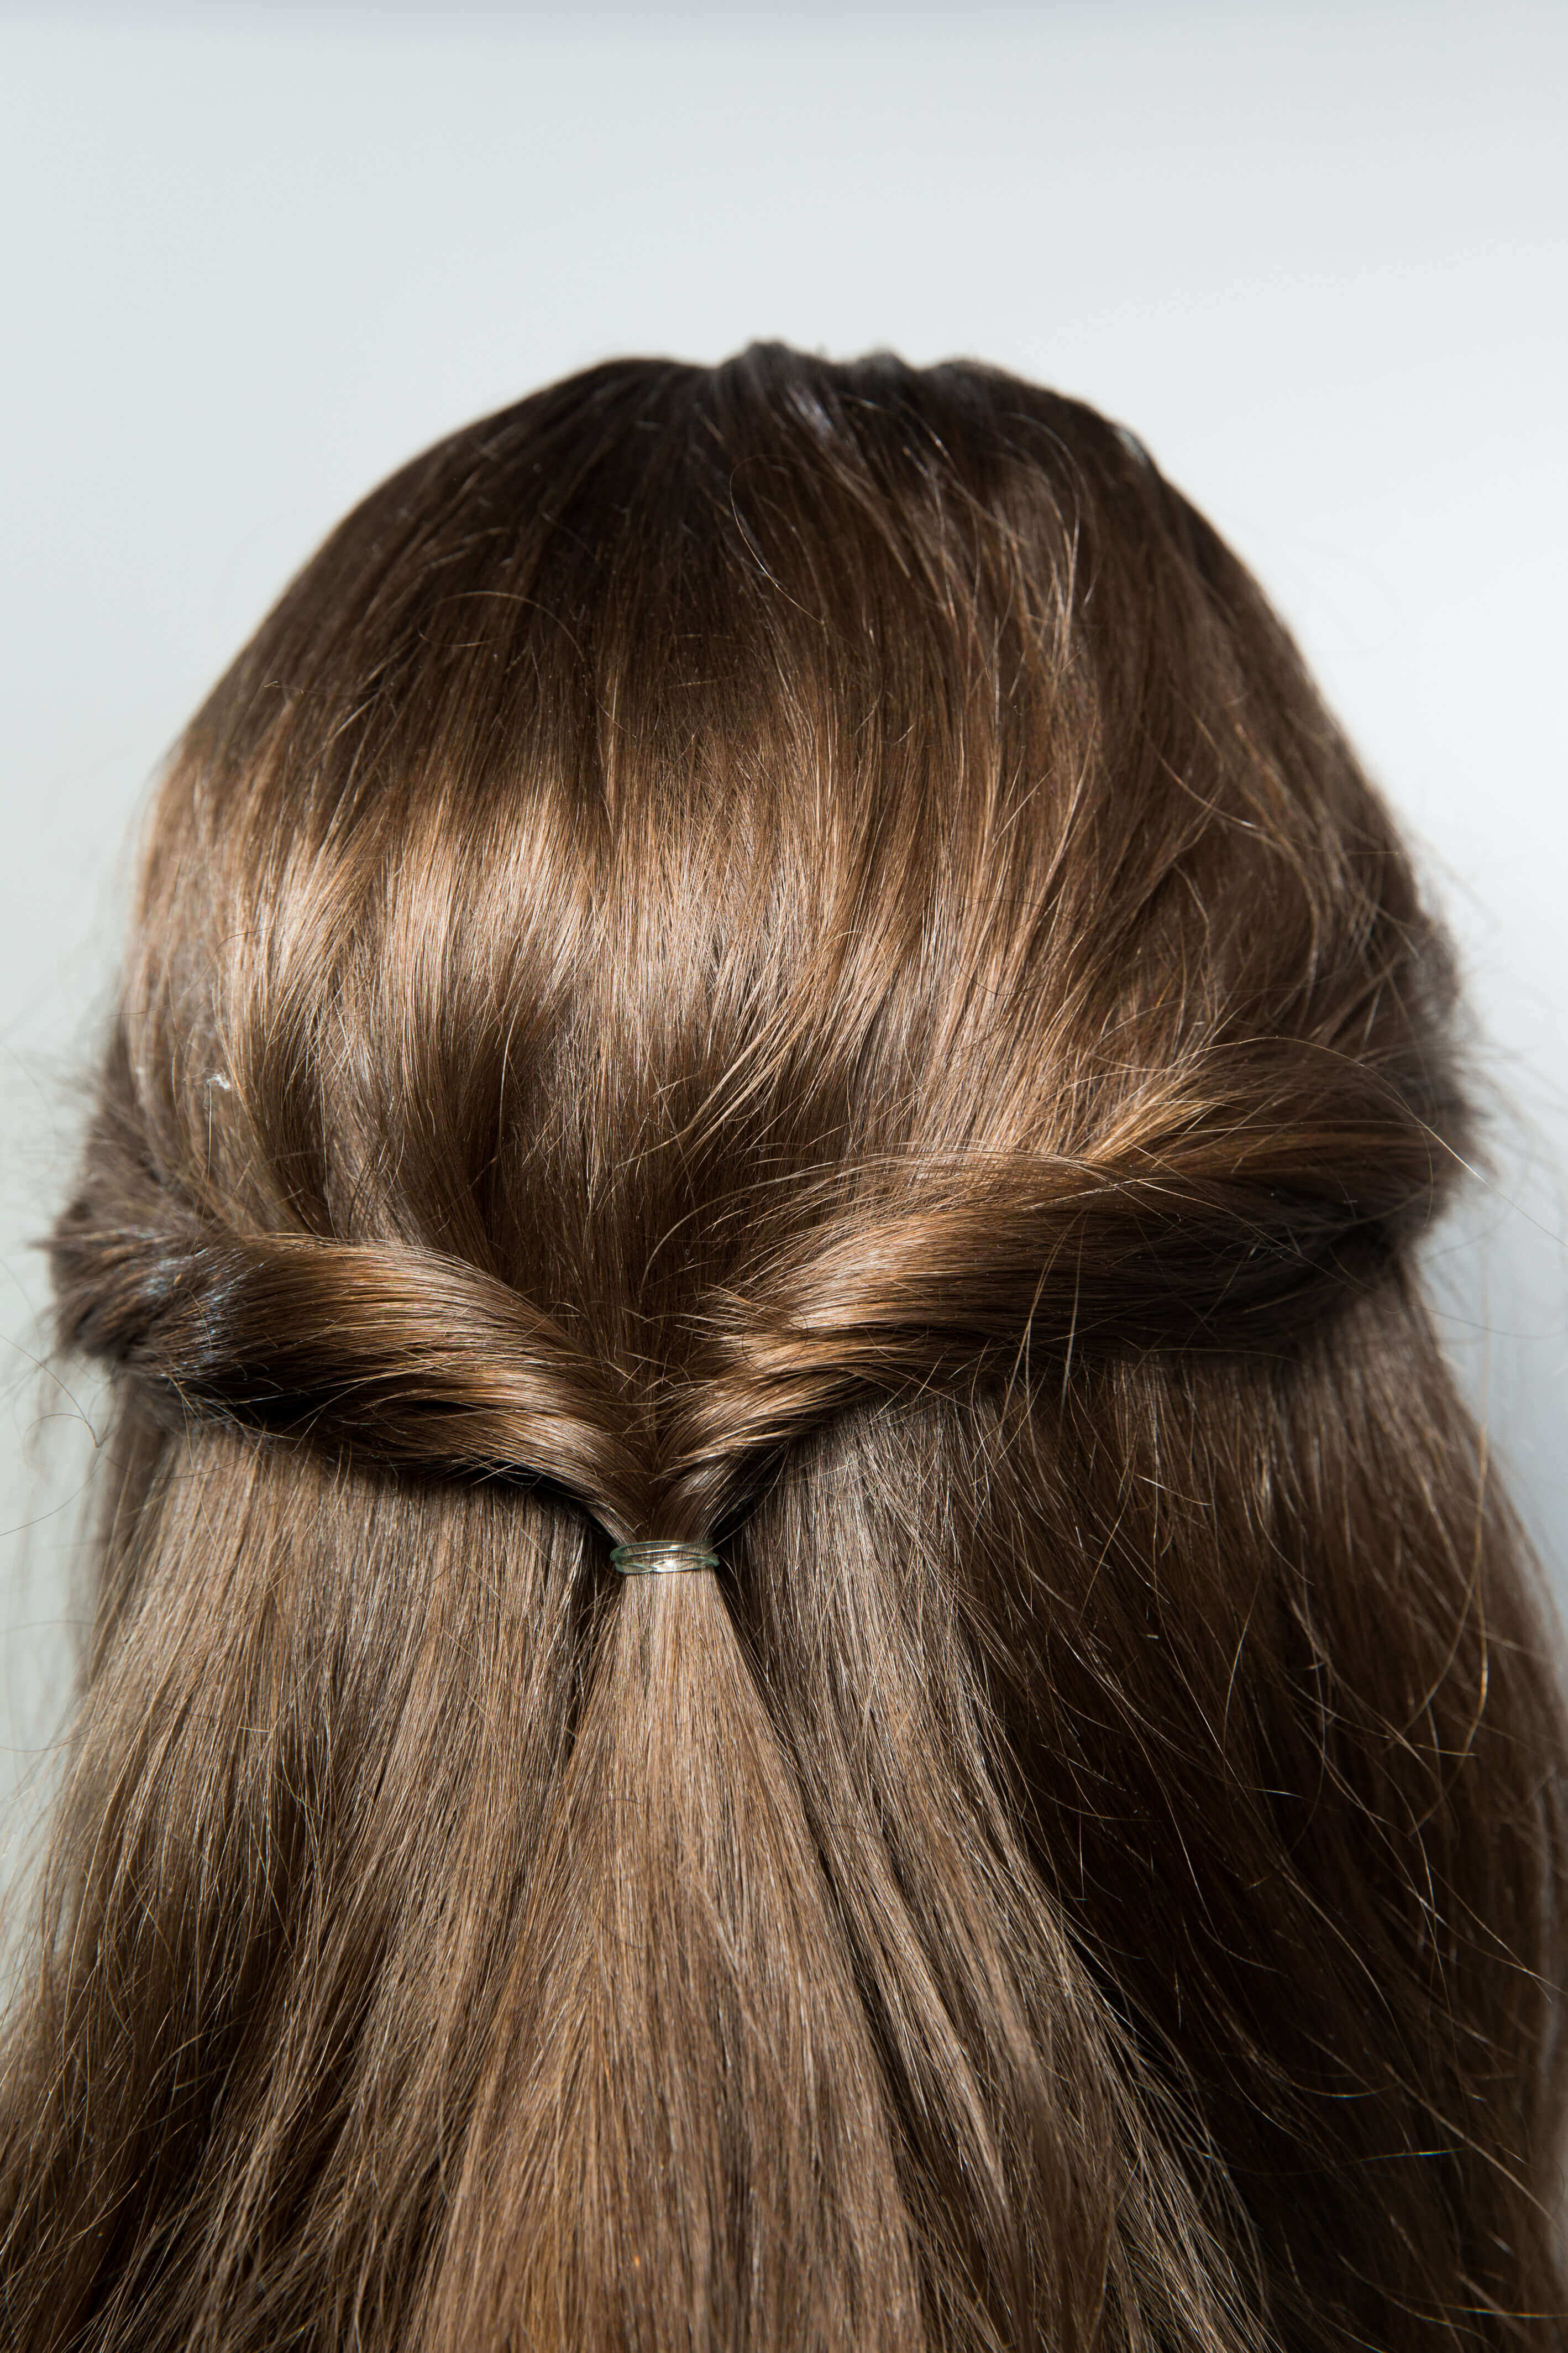 Pretty & Doable Hairstyles for Thin Hair for Brides & Bridesmaids